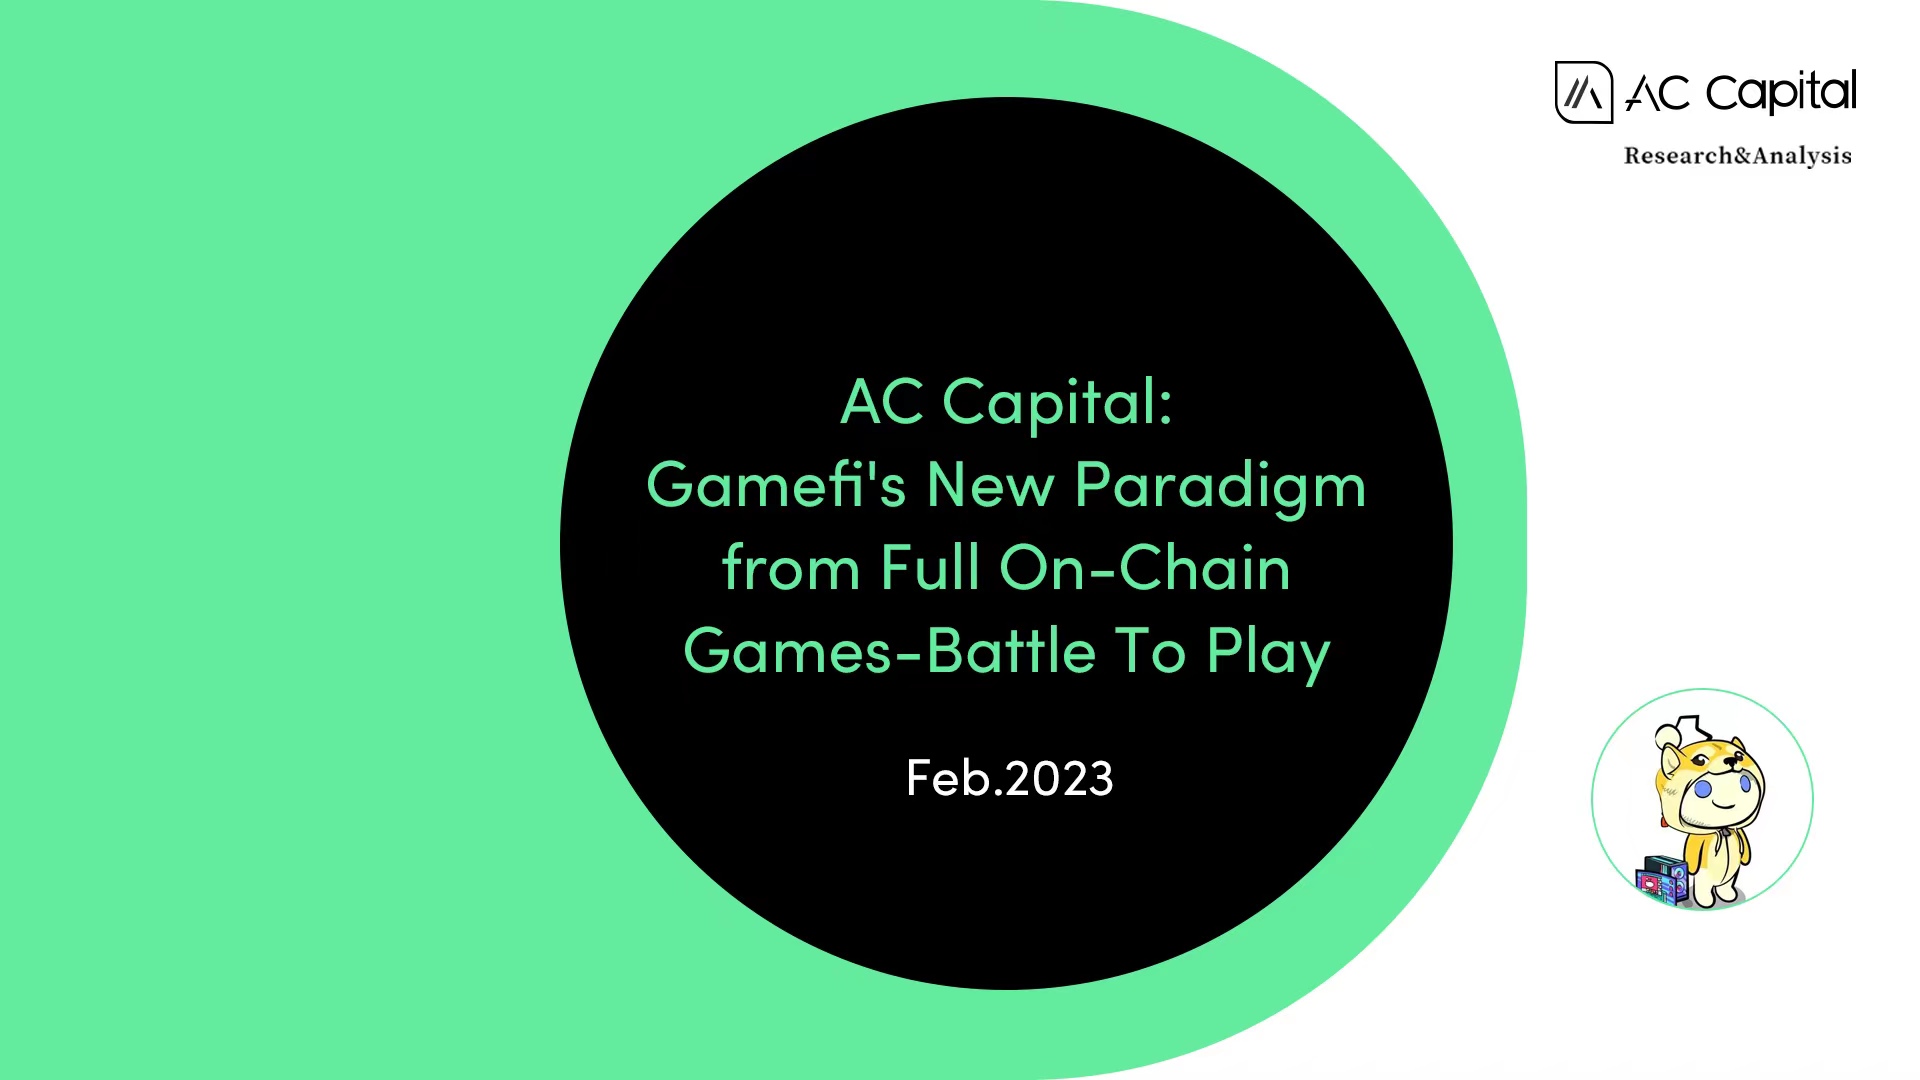 Gamefi's New Paradigm from Full On-Chain Games-Battle To Play